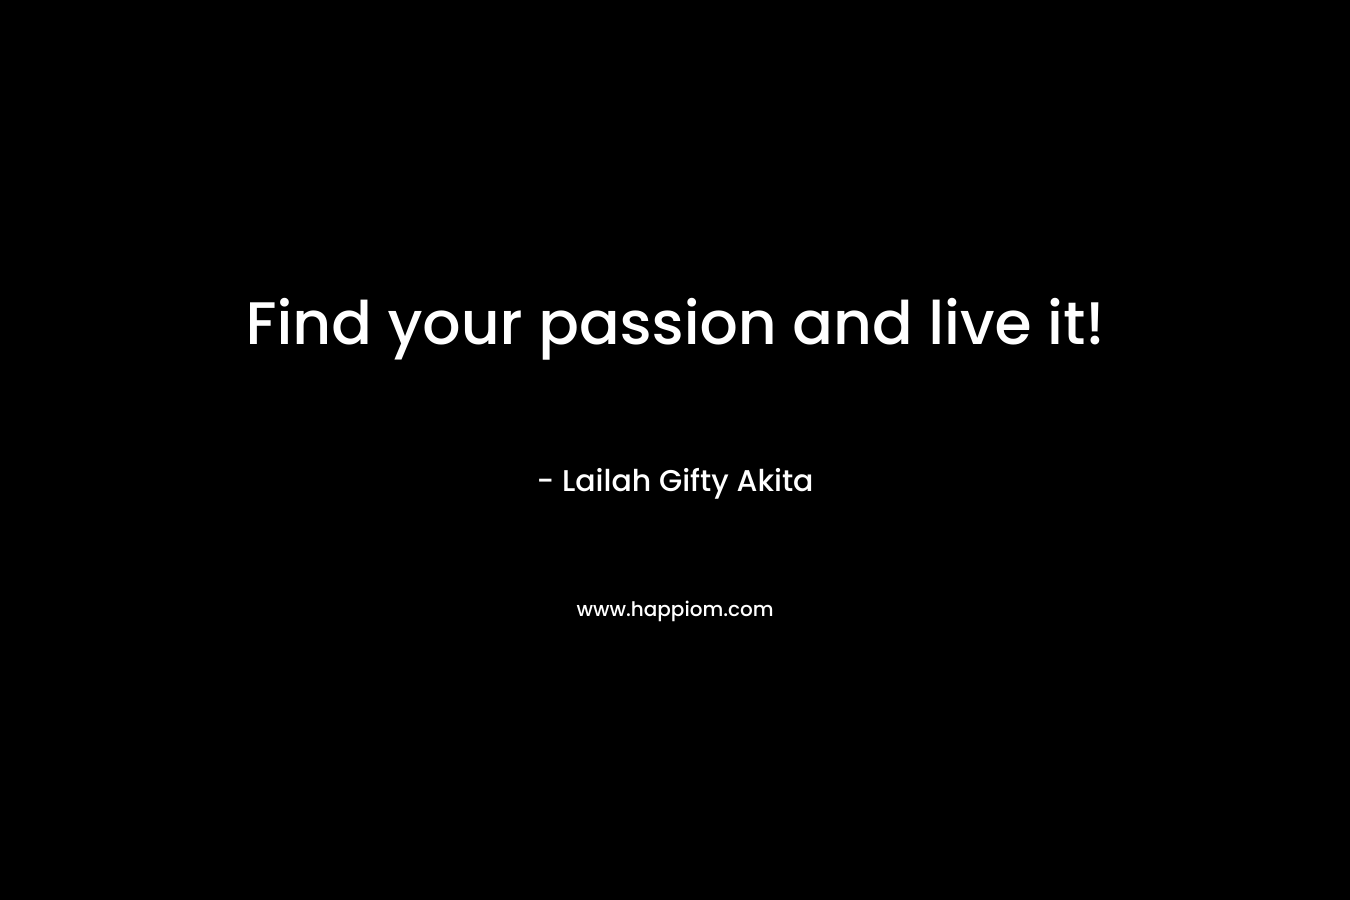 Find your passion and live it!